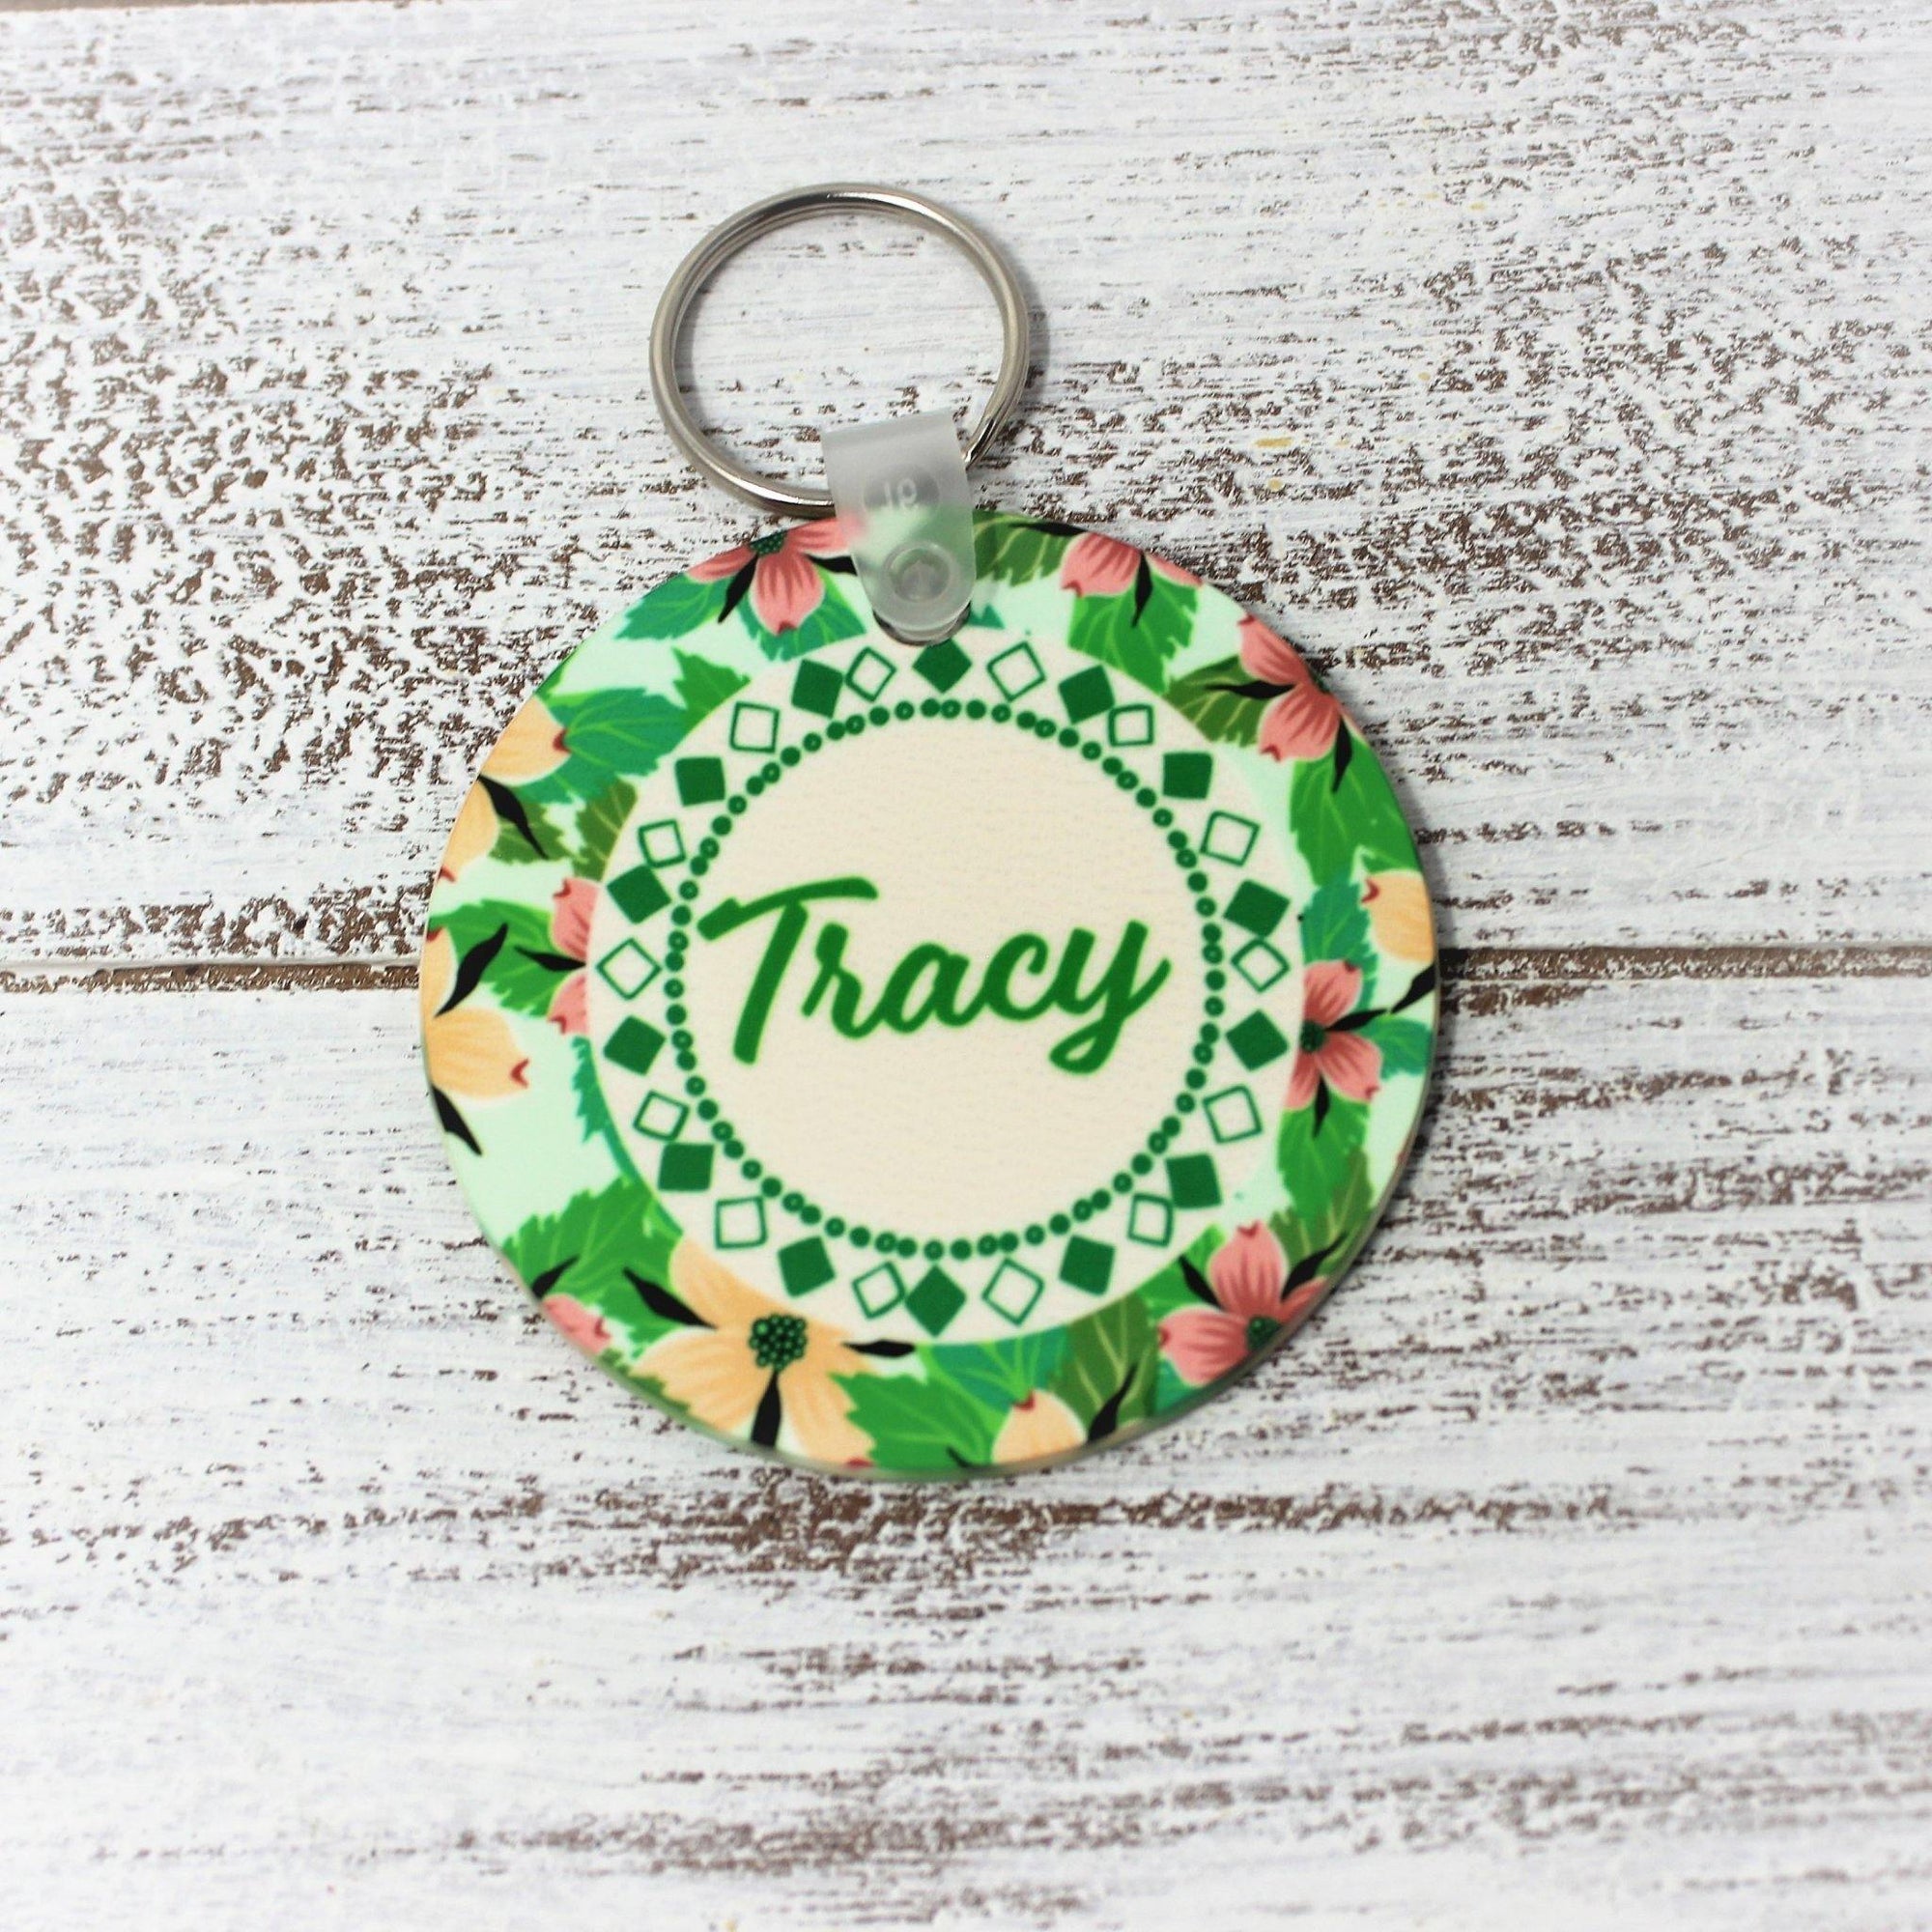 Monogrammed Key Chain | Personalized Key Chain | Floral Design - This & That Solutions - Monogrammed Key Chain | Personalized Key Chain | Floral Design - Personalized Gifts & Custom Home Decor